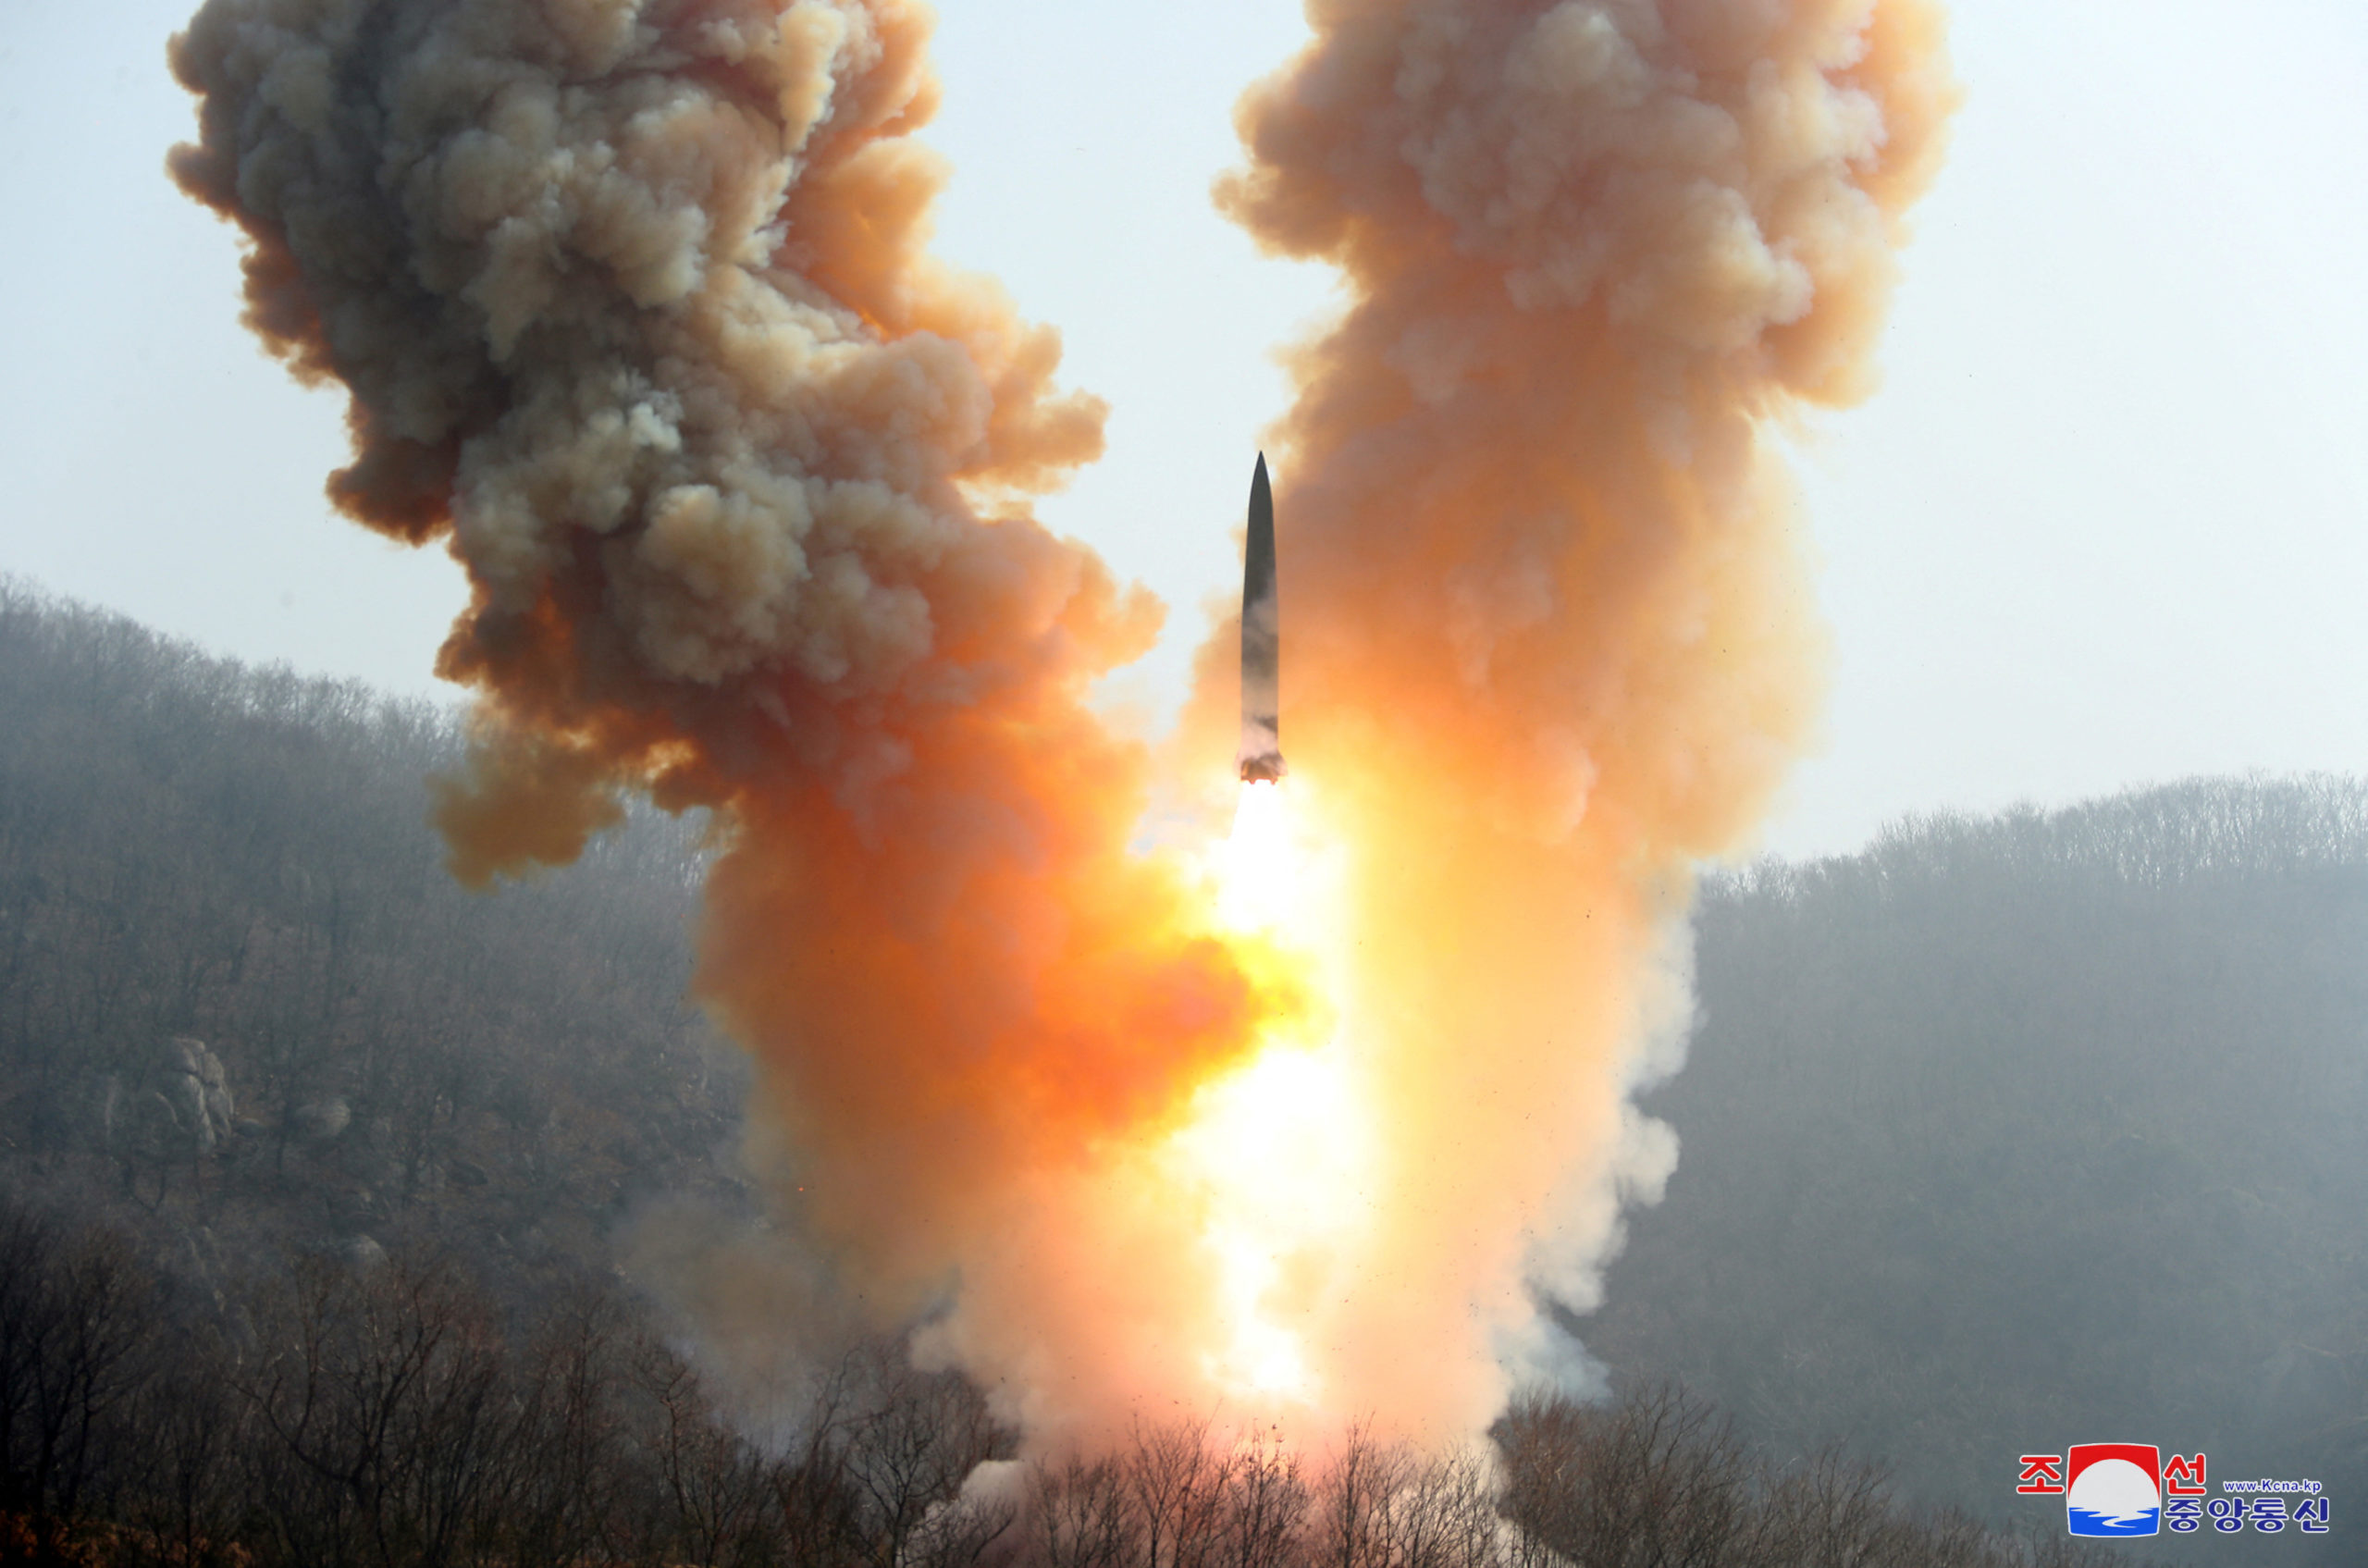 A view shows a missile fired by the North Korean military at an undisclosed location in this image released by North Korea's Central News Agency (KCNA) on March 20, 2023.